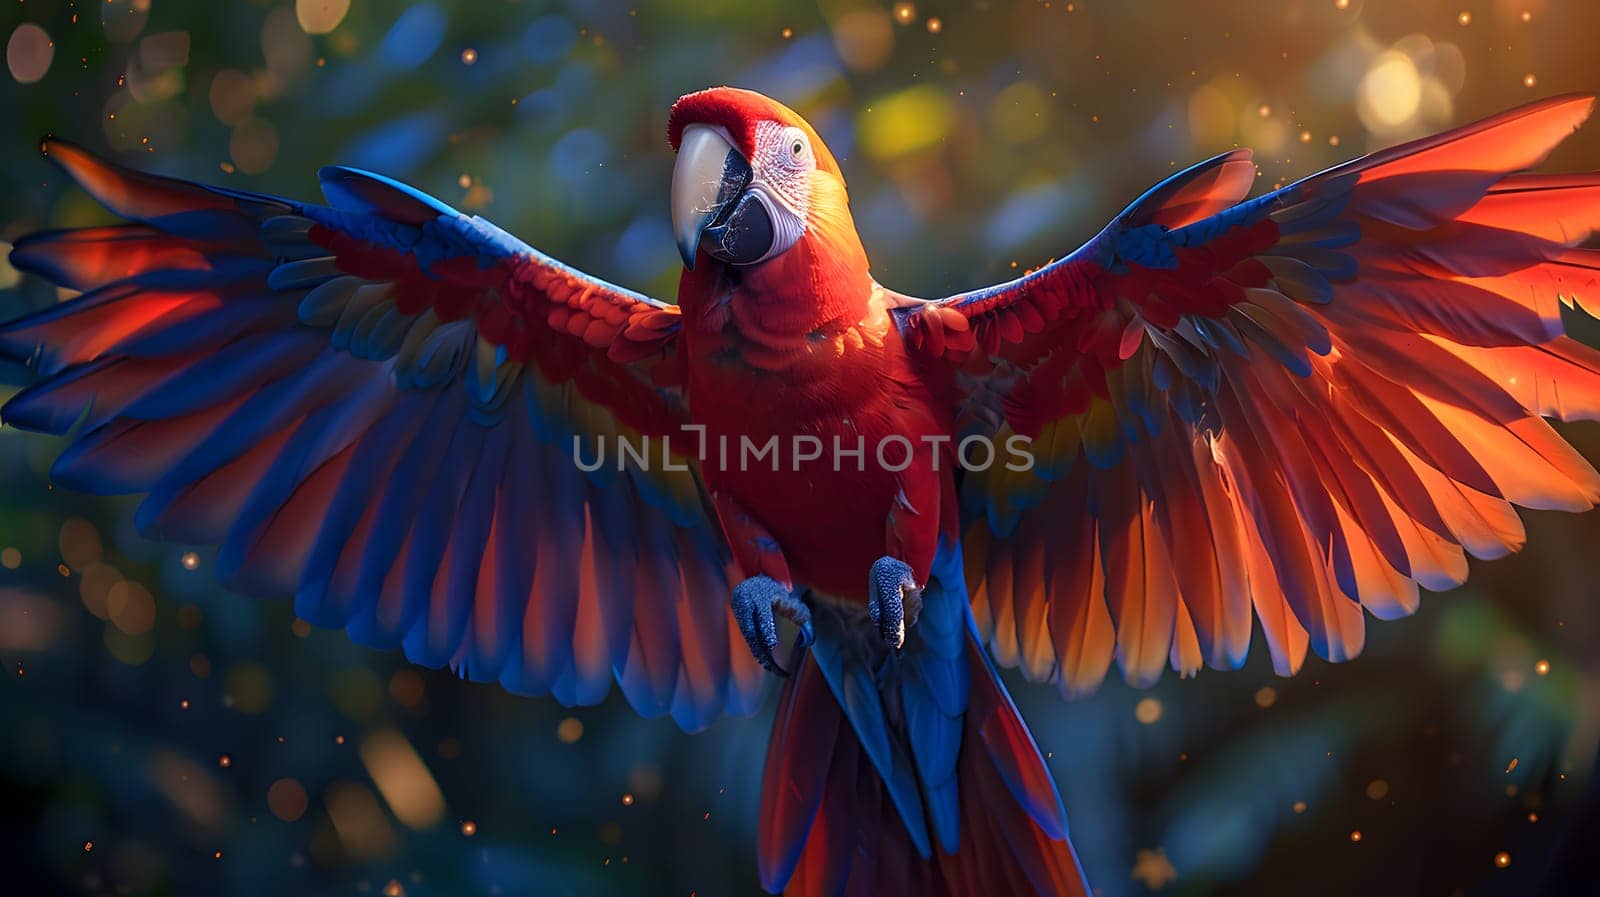 A vibrant red and blue macaw parrot, a type of parrot vertebrate organism, is gracefully flying in the air with its colorful feathers spread, showcasing its beak and keen eye